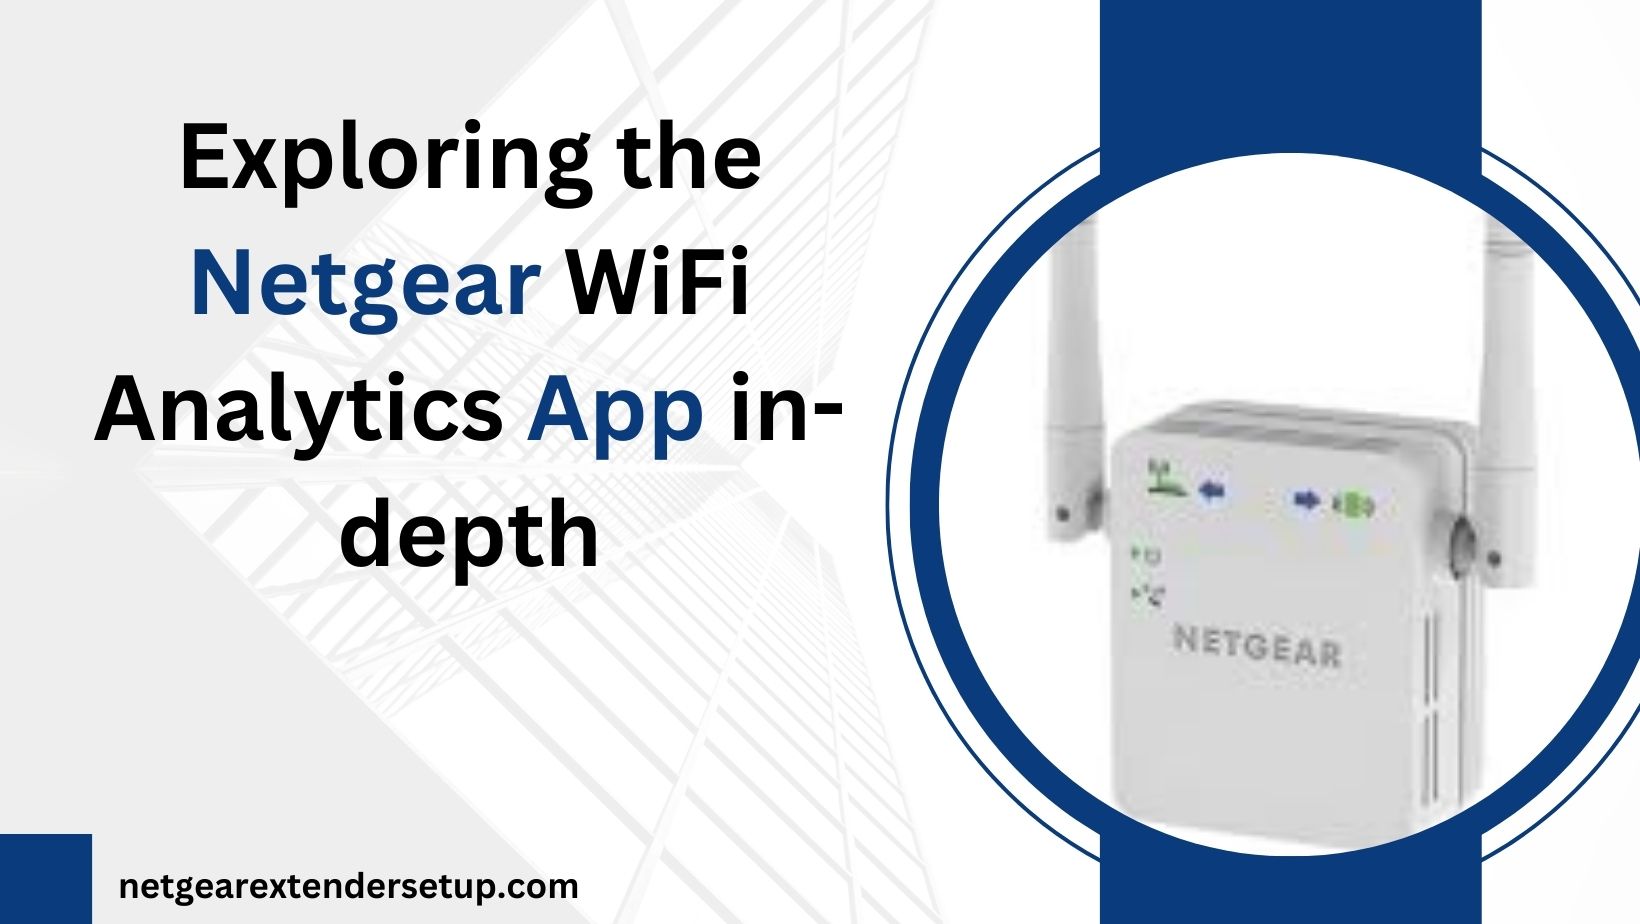 You are currently viewing Exploring the Netgear WiFi Analytics App in-depth